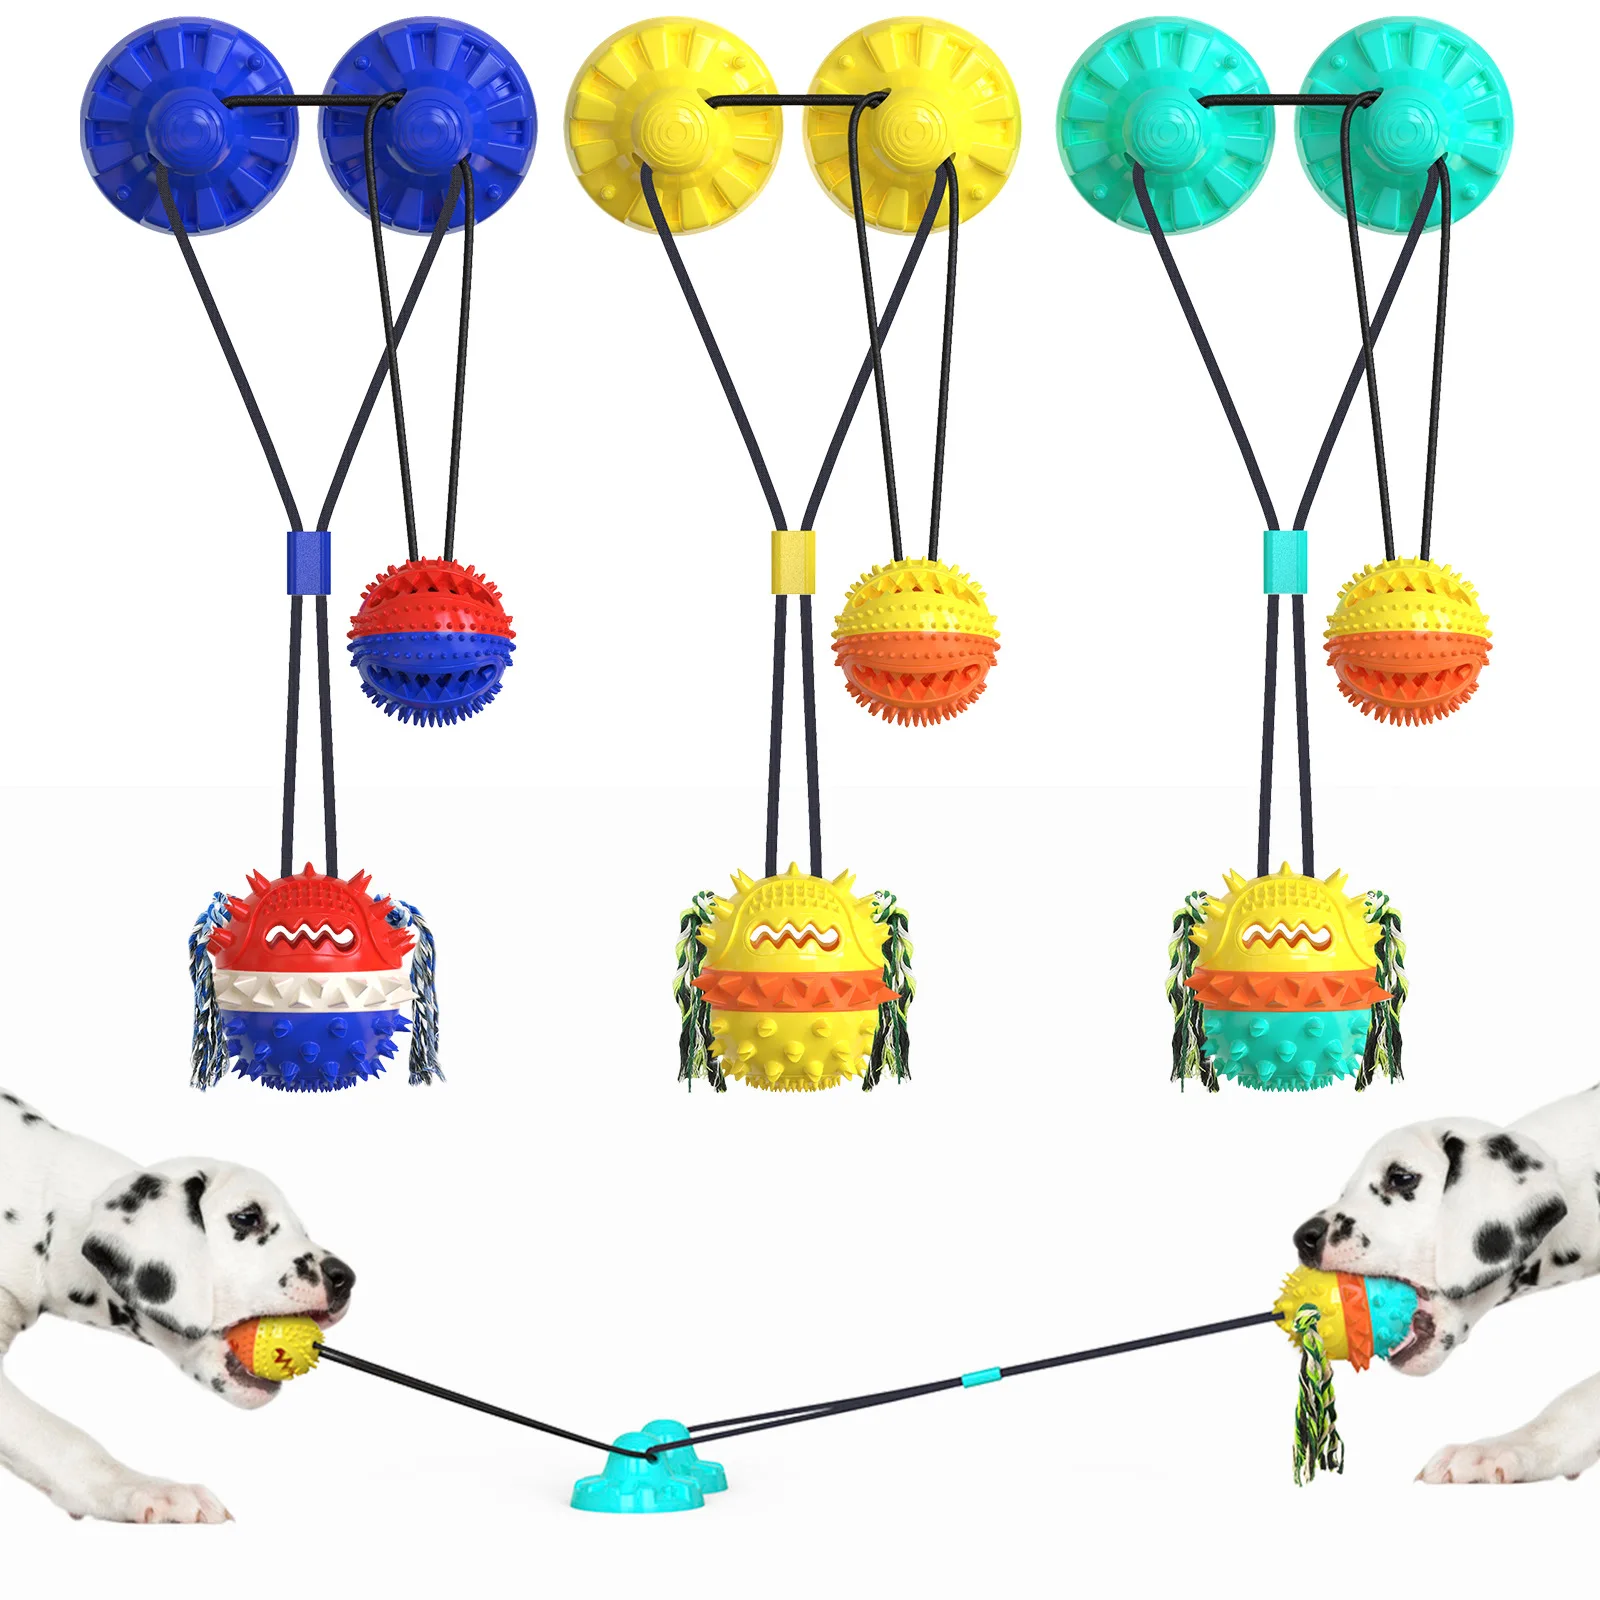 

2021 Cute Novelty Moving Pulling Eco Latex Rubber Dogs Toy Chew Interactive Slow Feeder Squeaky Pet Toys Dog, Yellow,the blue,lake blue